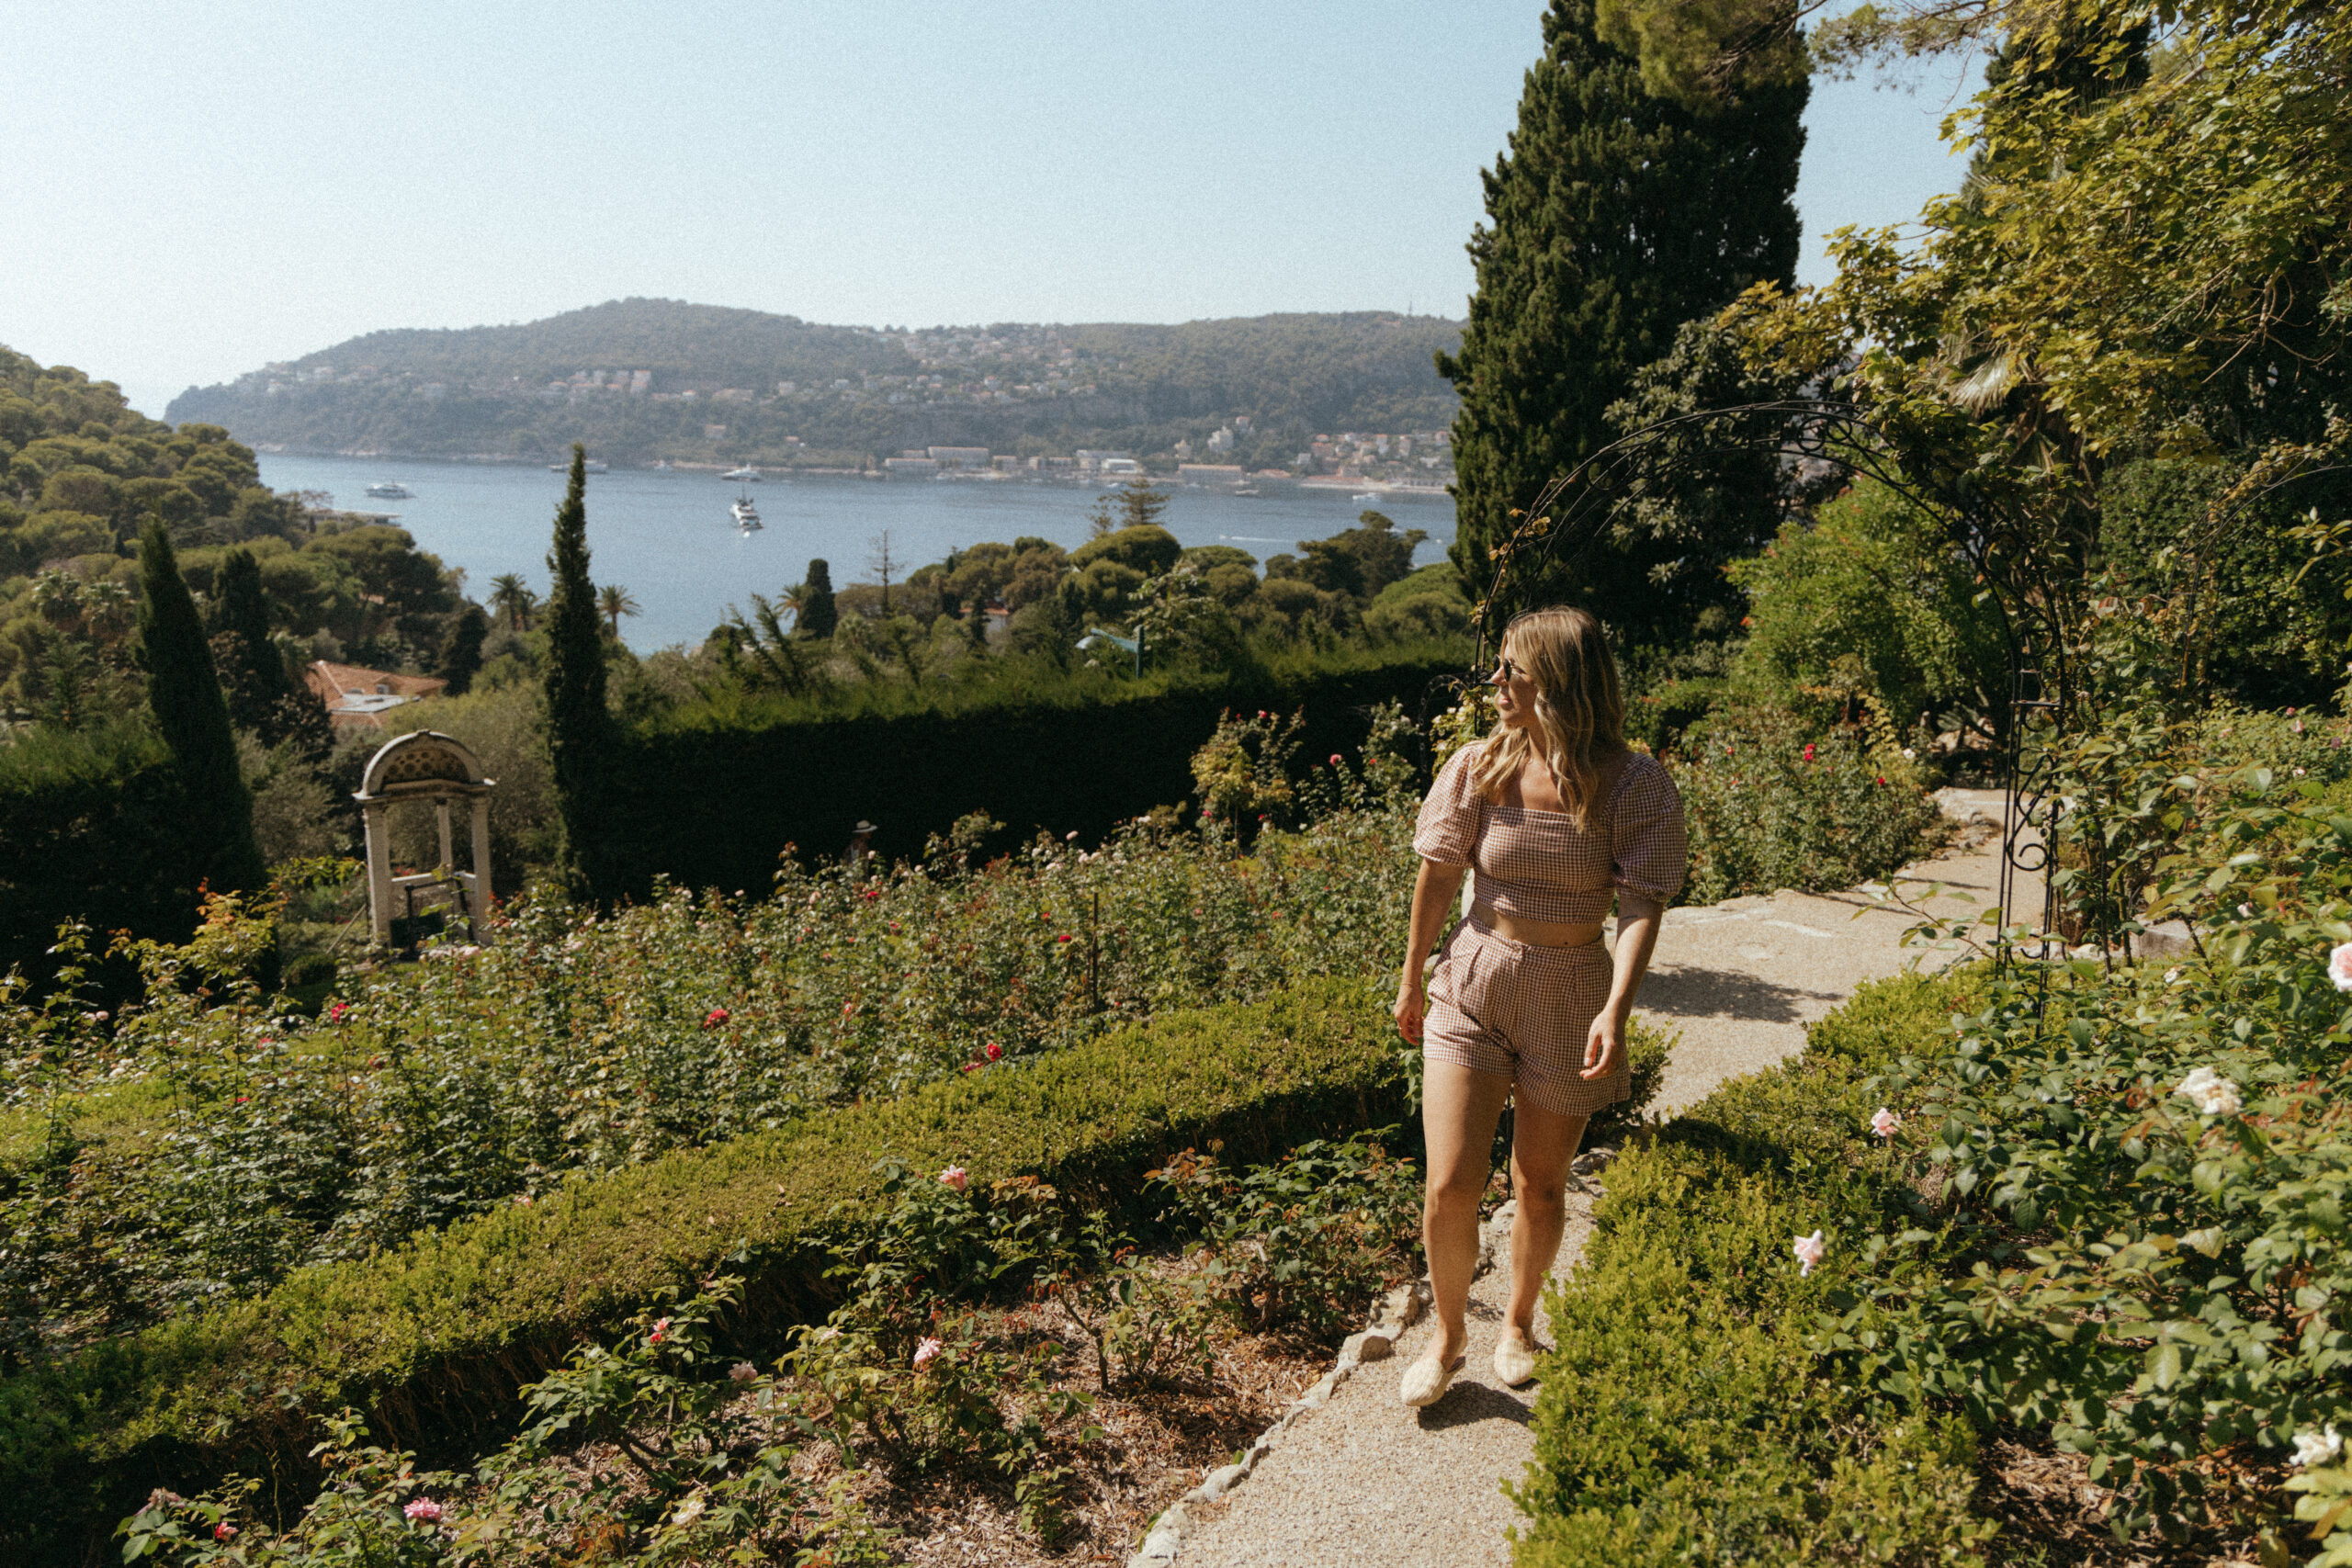 Villa Ephrussi de Rothschild things to do in Nice, France